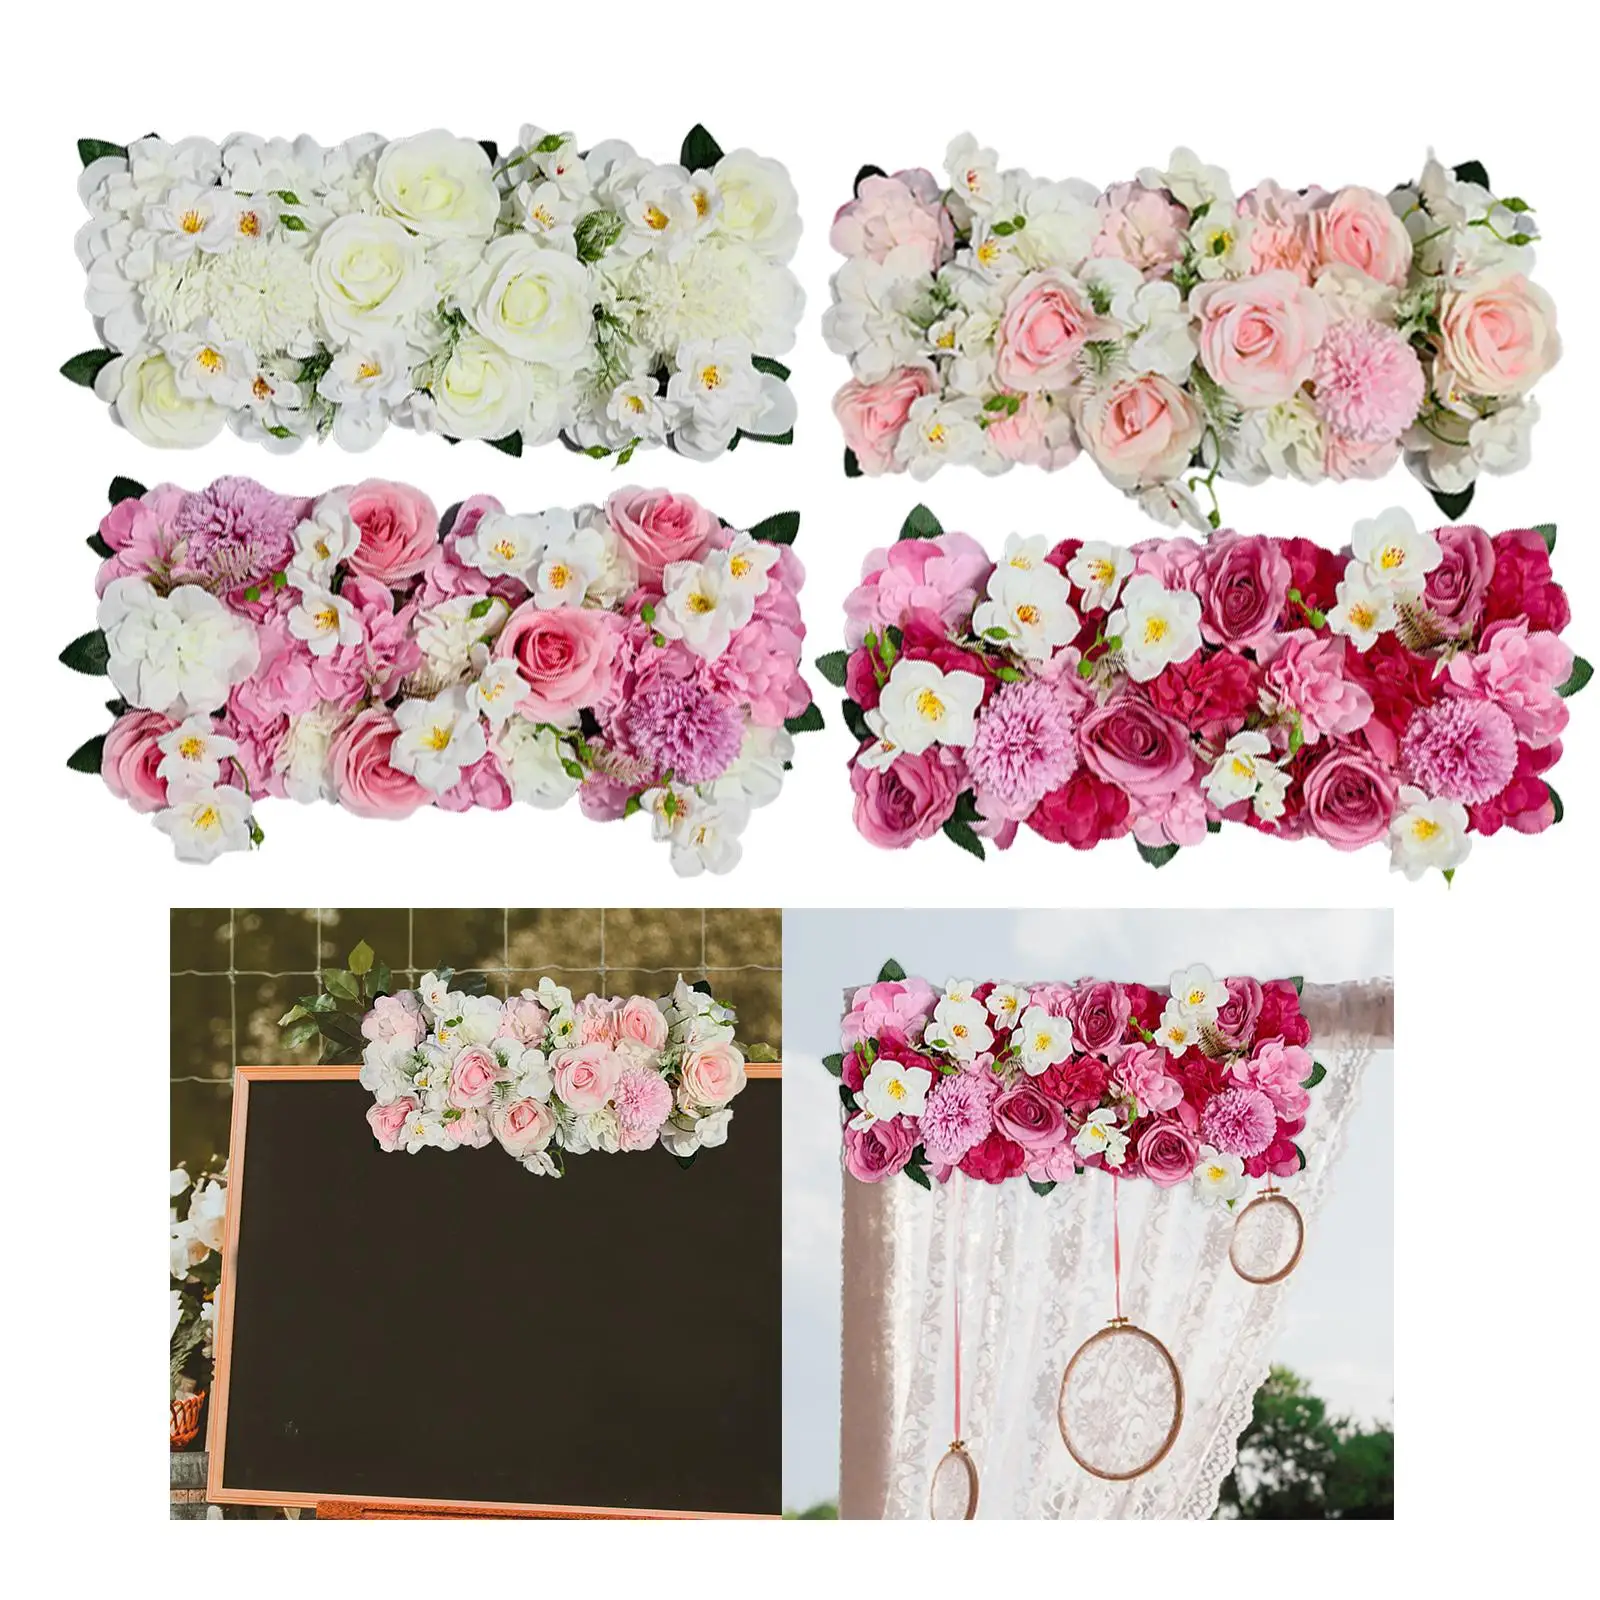 Arched Door Flower Row Decoration Silk Cloth Rose Photo Props Wedding Road Cited Flowers for Window Party T Station Wedding Door